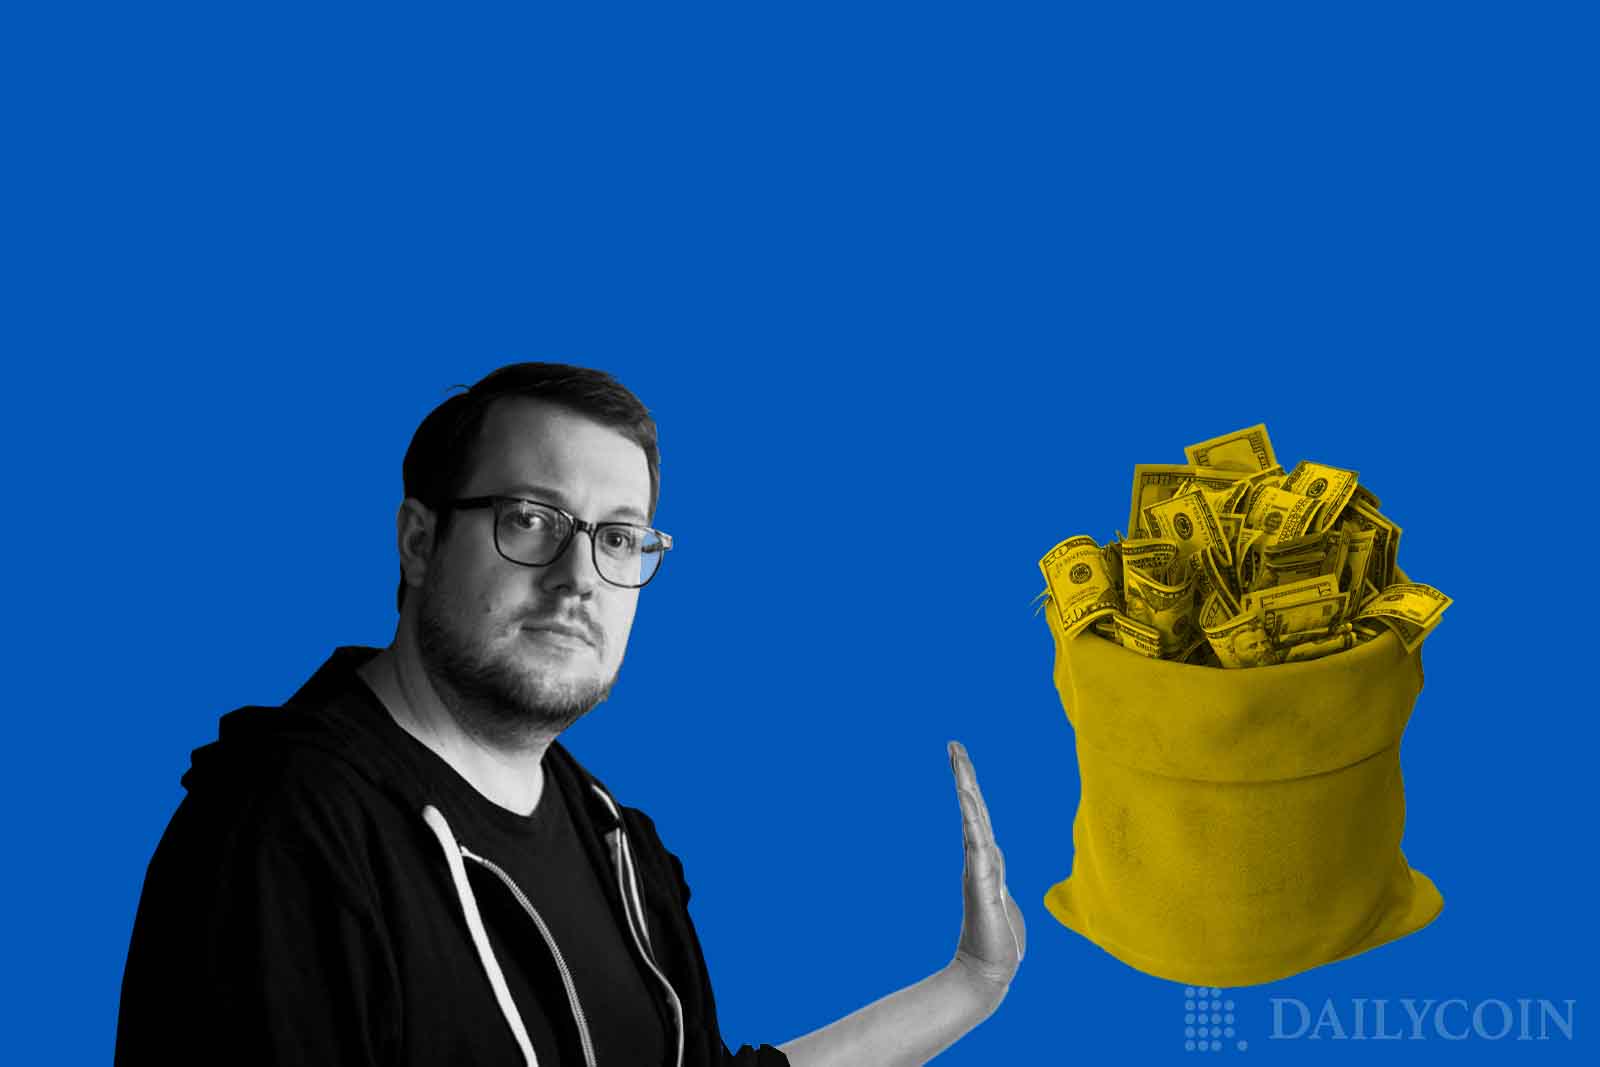 Dogecoin Founder Billy Markus Turns Down a Juicy 14M Offer from Dogechain